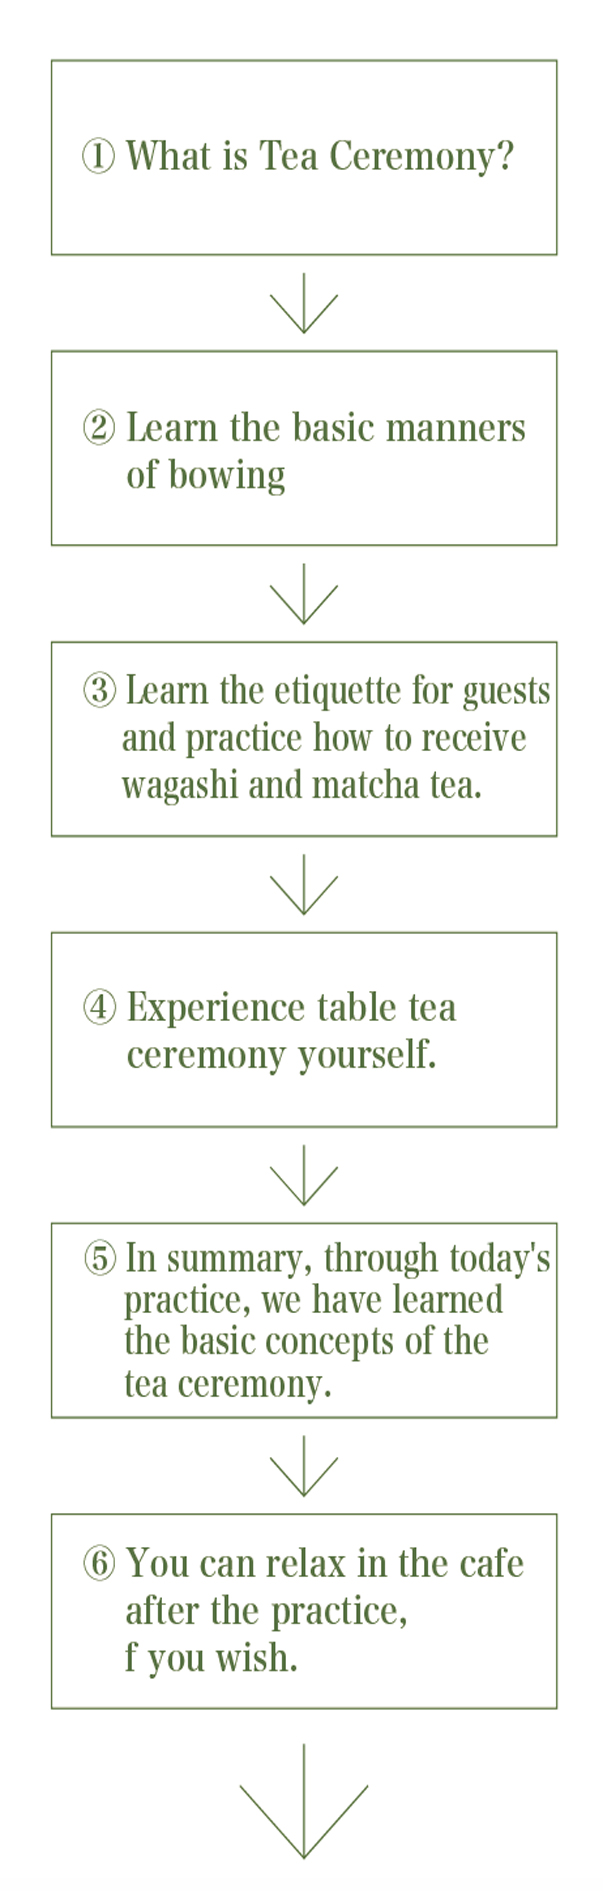 ①What is Tea Ceremony?②Learn the basic manners of bowing③Learn the etiquette for guests and practice how to receive wagashi and matcha tea.④Experience table tea ceremony yourself.⑤In summary, through today's practice, we have learned the basic concepts of the tea ceremony.⑥You can relax in the cafe after the practice, if you wish.